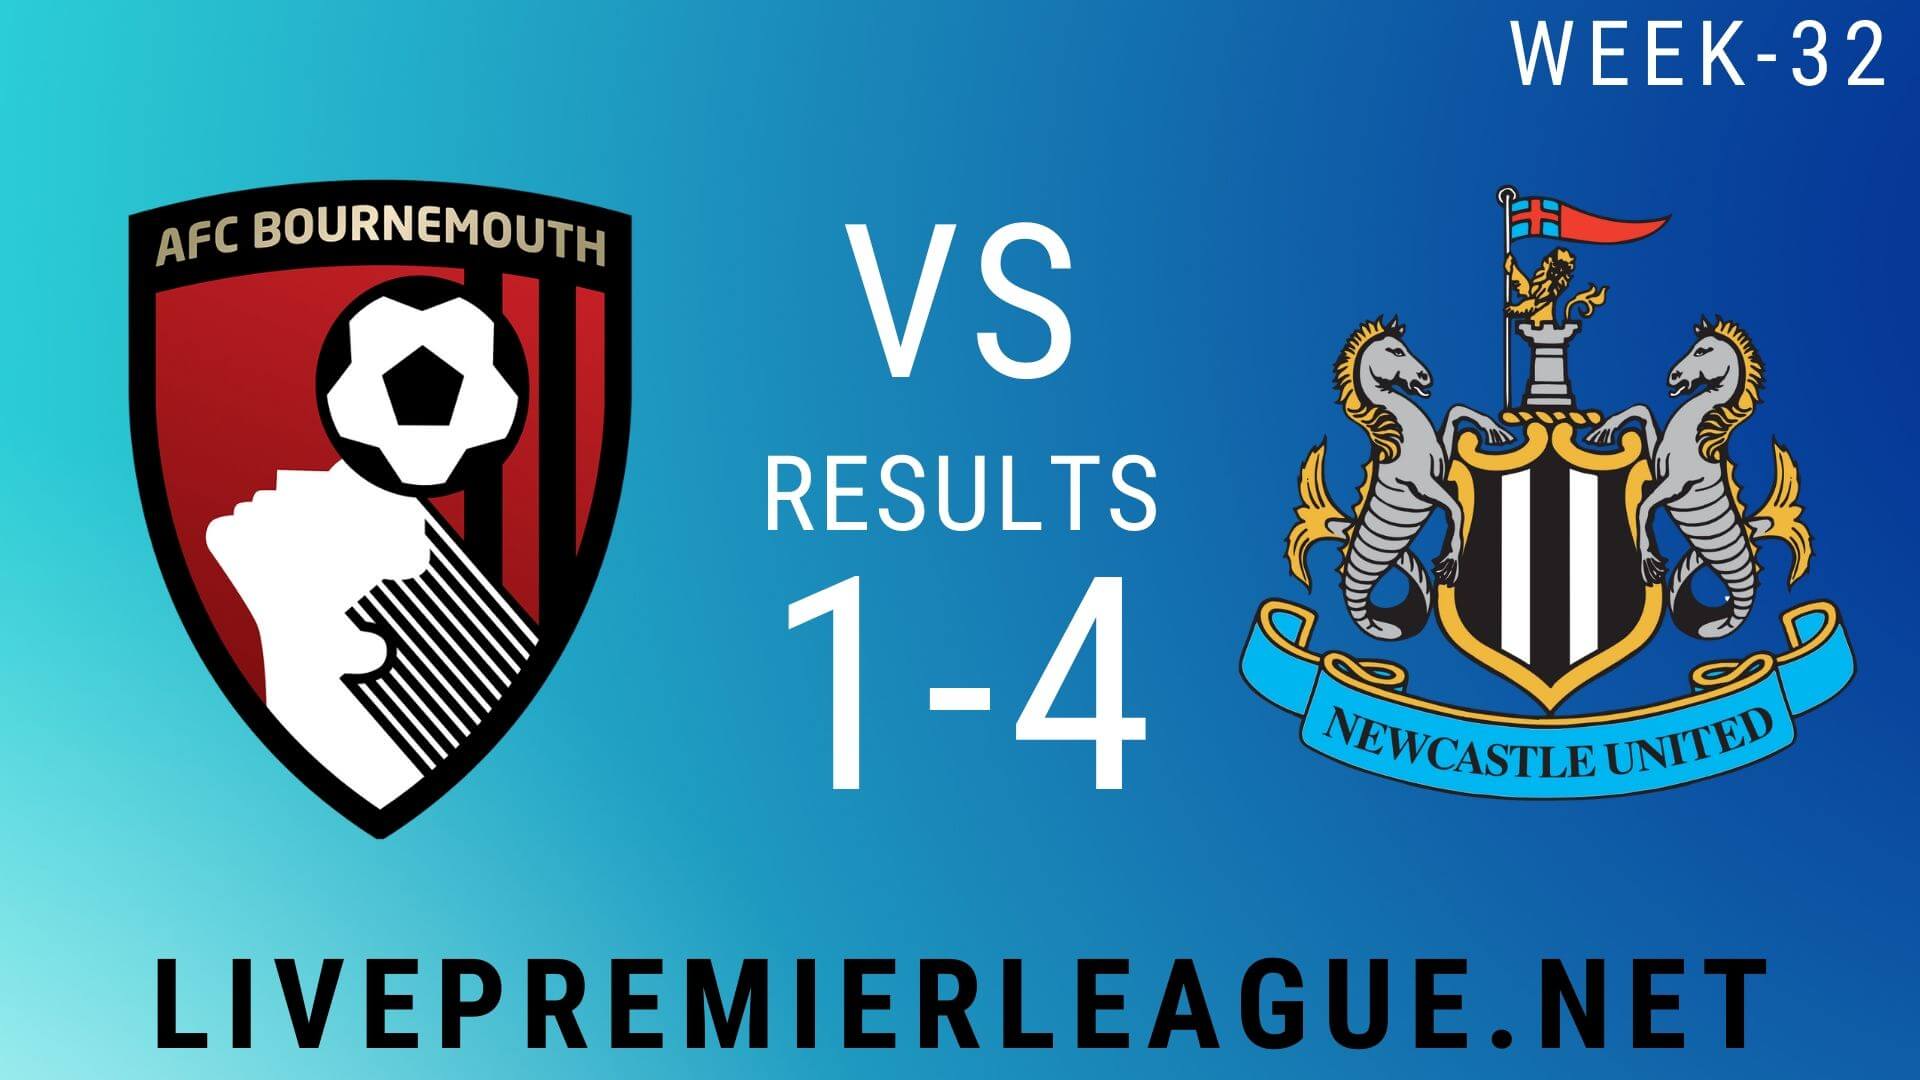 AFC Bournemouth Vs Newcastle United | Week 32 Result 2020